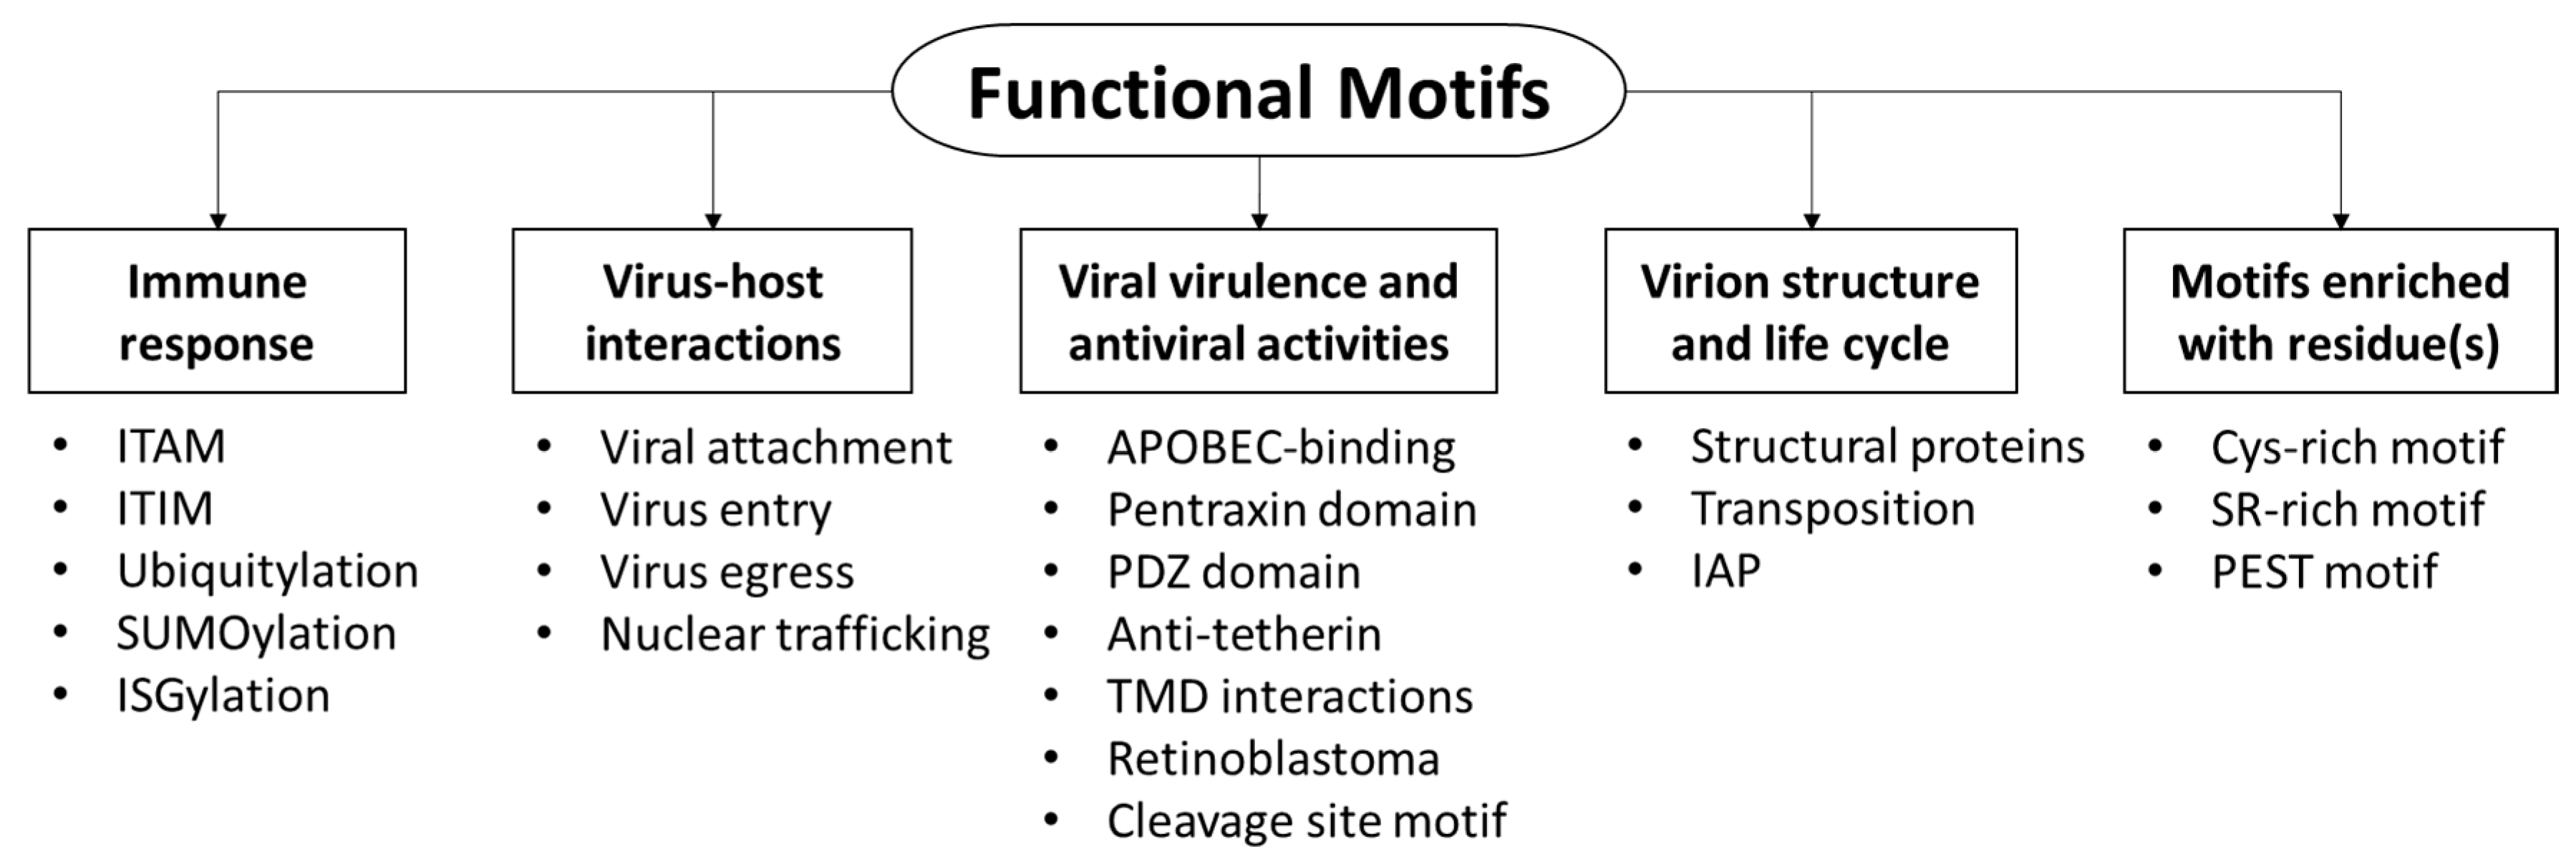 proteomes free full text a review of functional motifs utilized by viruses html functional motifs utilized by viruses